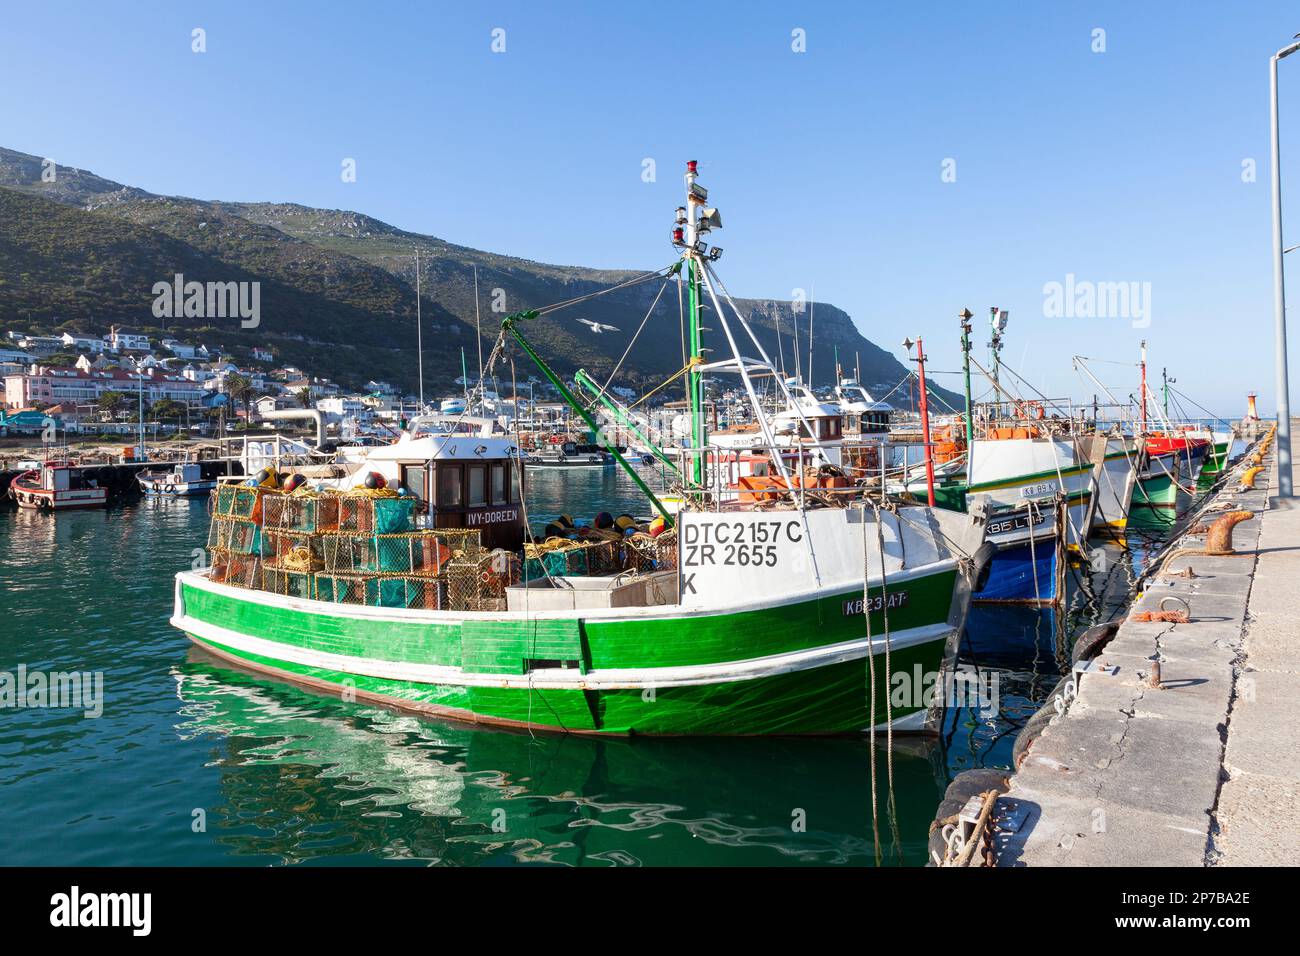 Fishing boats moored in Kalk Bay Harbour, Cape Town, Western Cape, South Africa at sunset, A popular tourist attraction and fish market Stock Photo